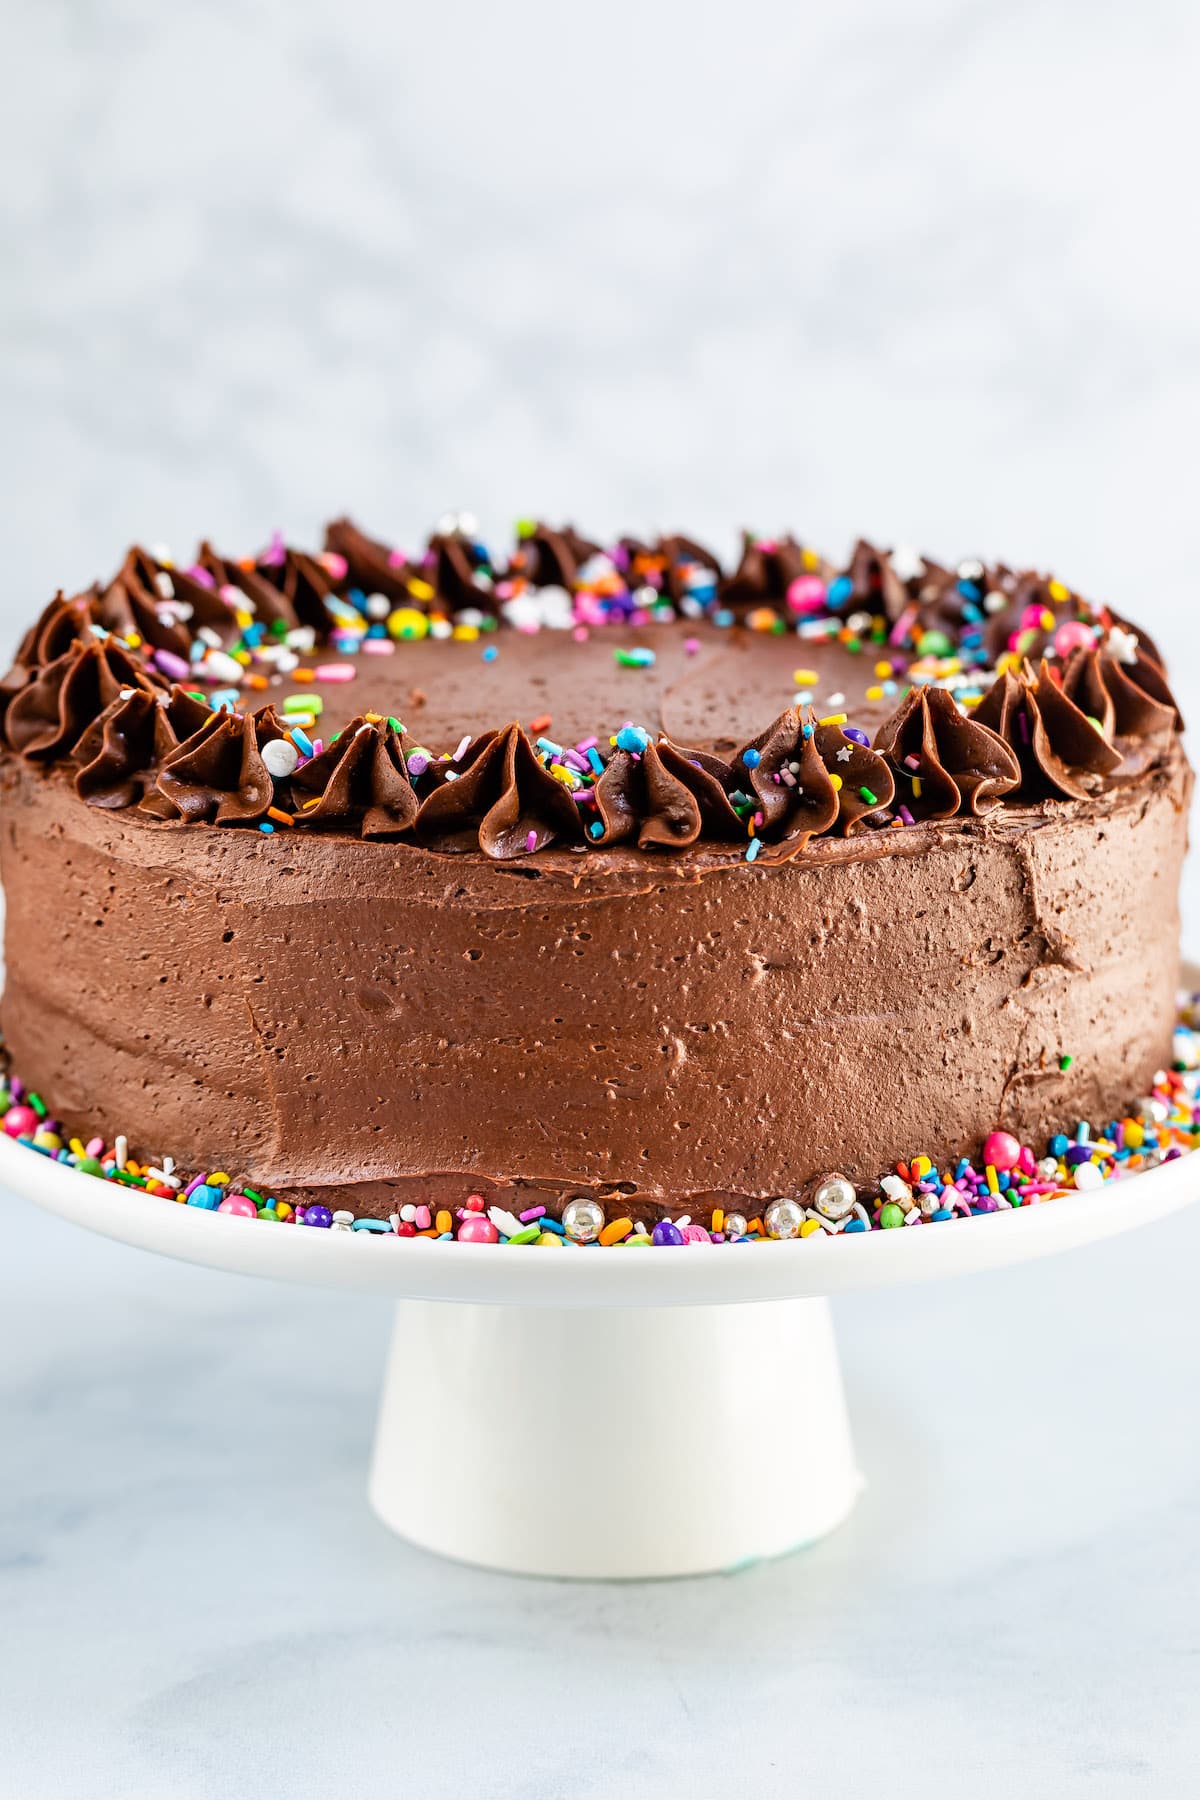 chocolate cake with chocolate frosting and covered in colorful sprinkles.